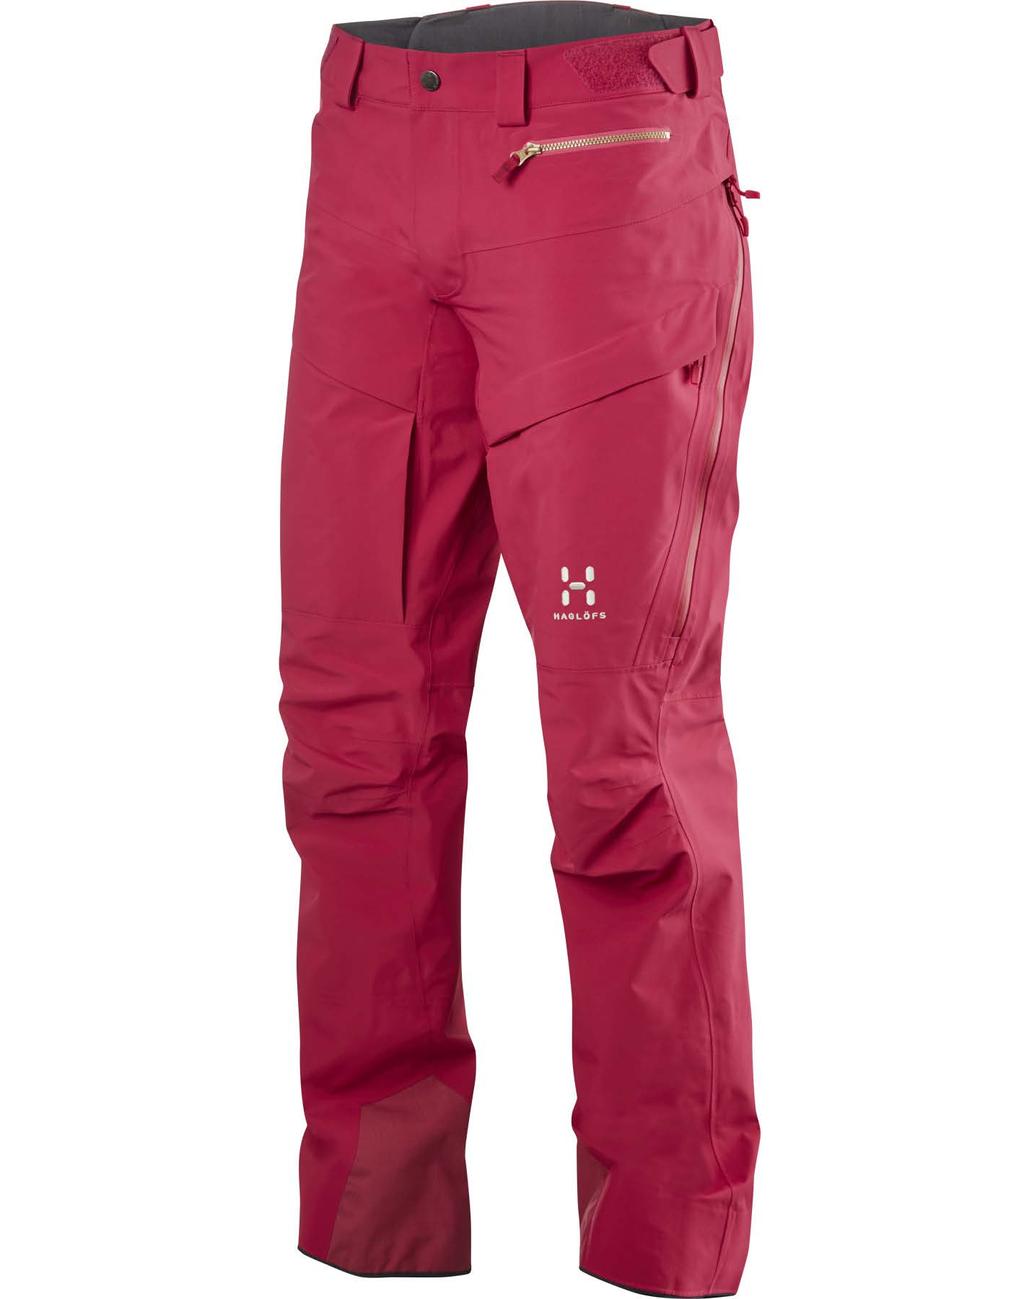 SKADE PANT WOMEN Skade Pant is fully wind- and waterproof and features articulated knees, waist adjustment and side ventilation.